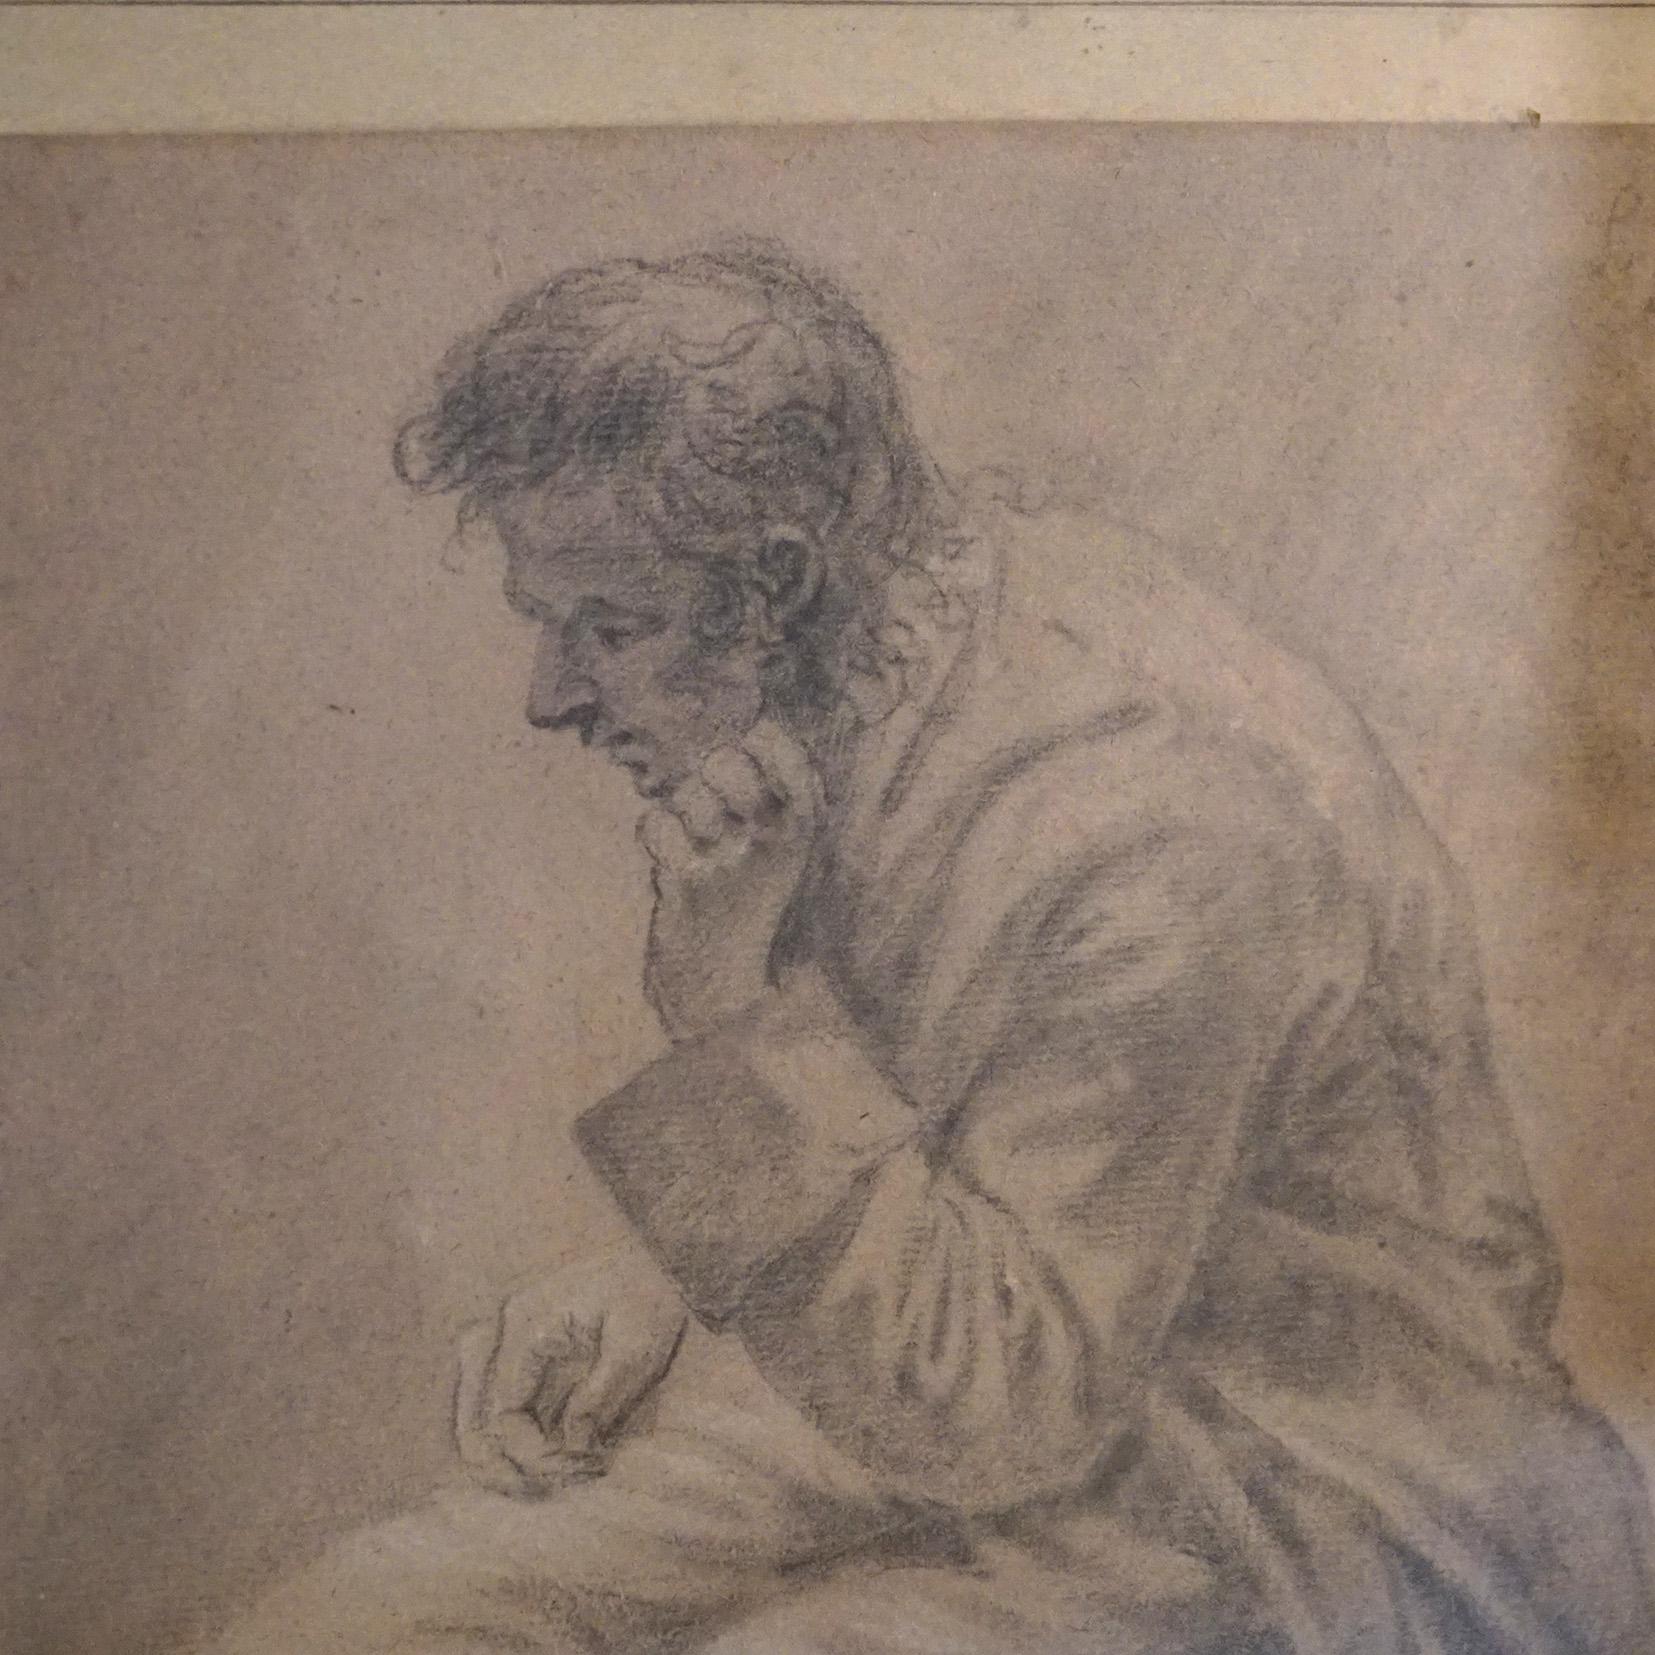 Antique Pencil Portrait Drawing of a Seated Man, Framed, 19th C

Measures - 19